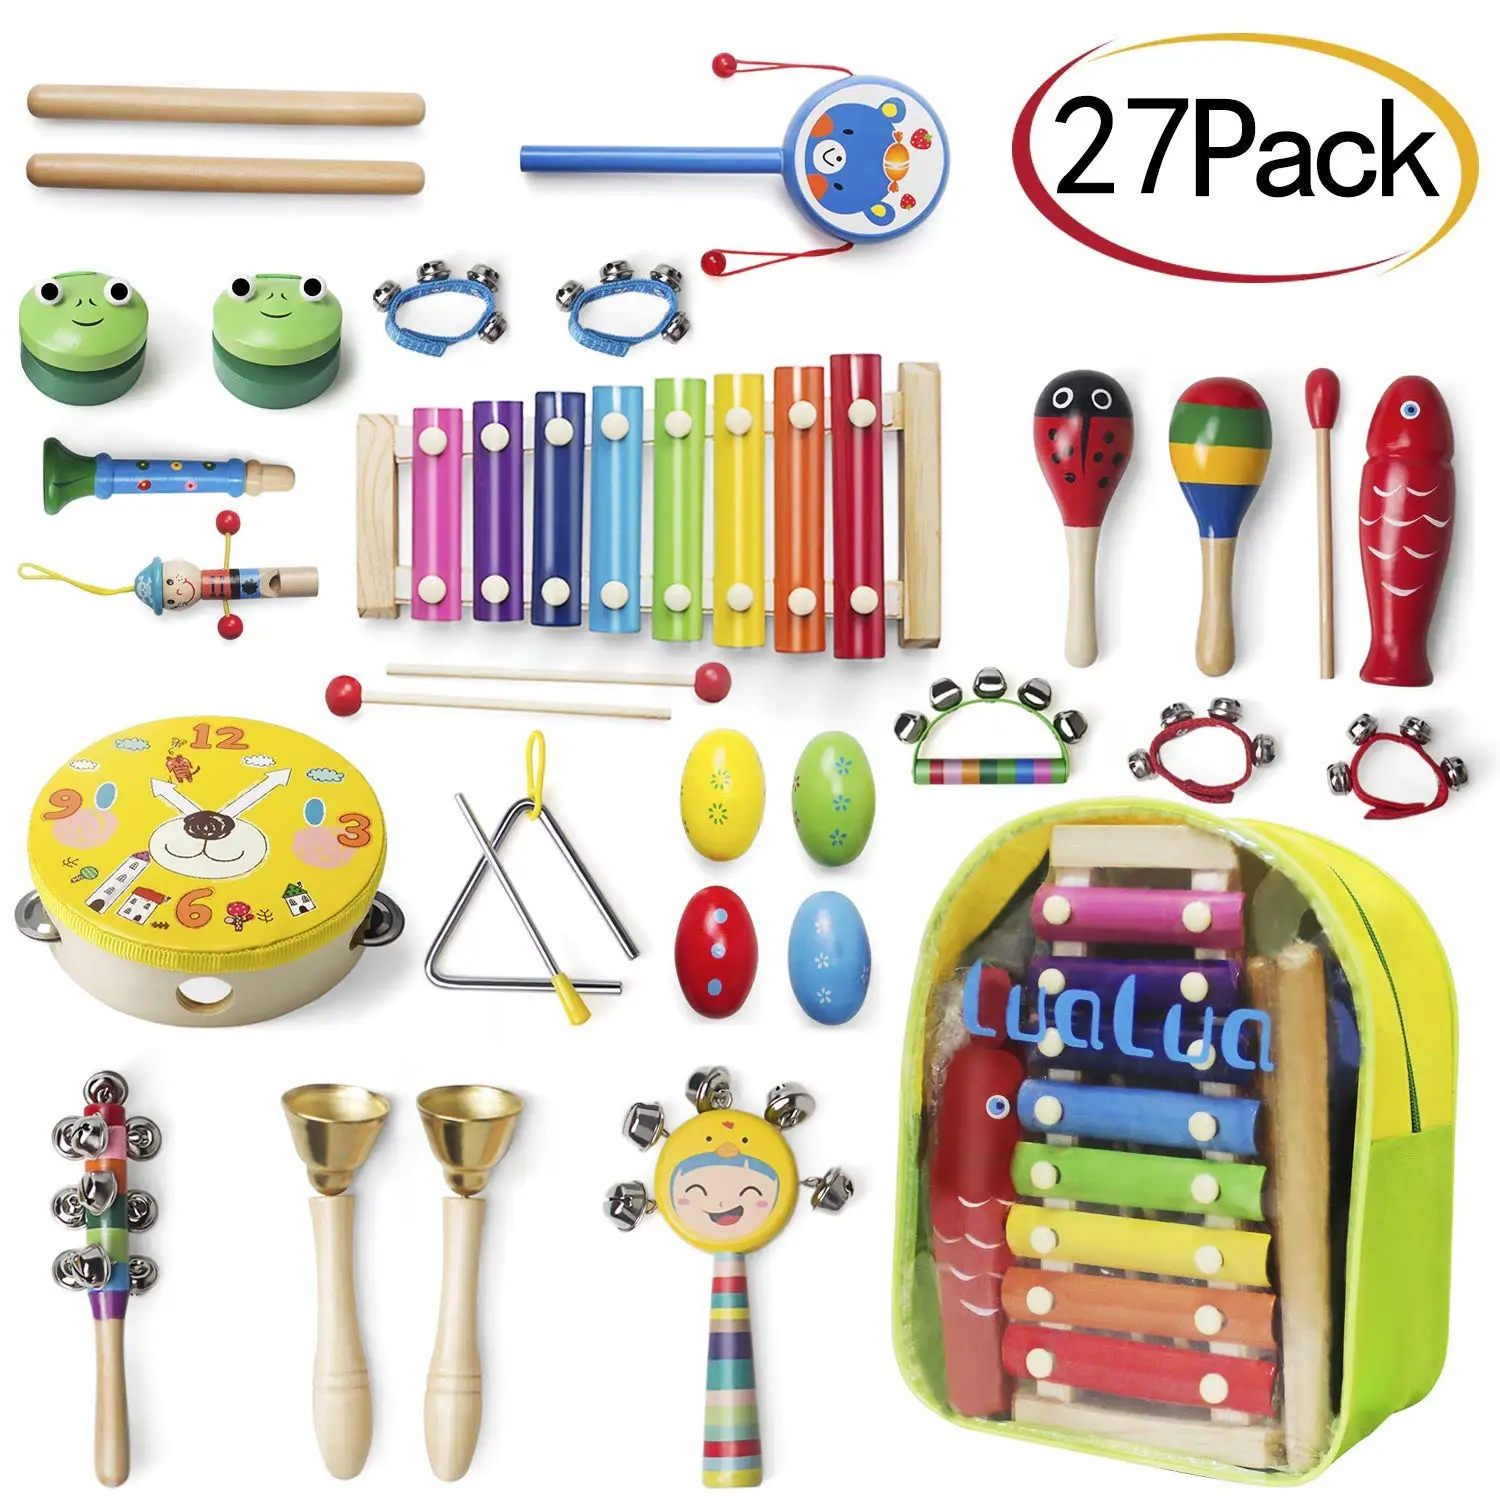 Buy LuaLua Toddler toys Musical Instruments for 1 2 3 year olds 27 pcs